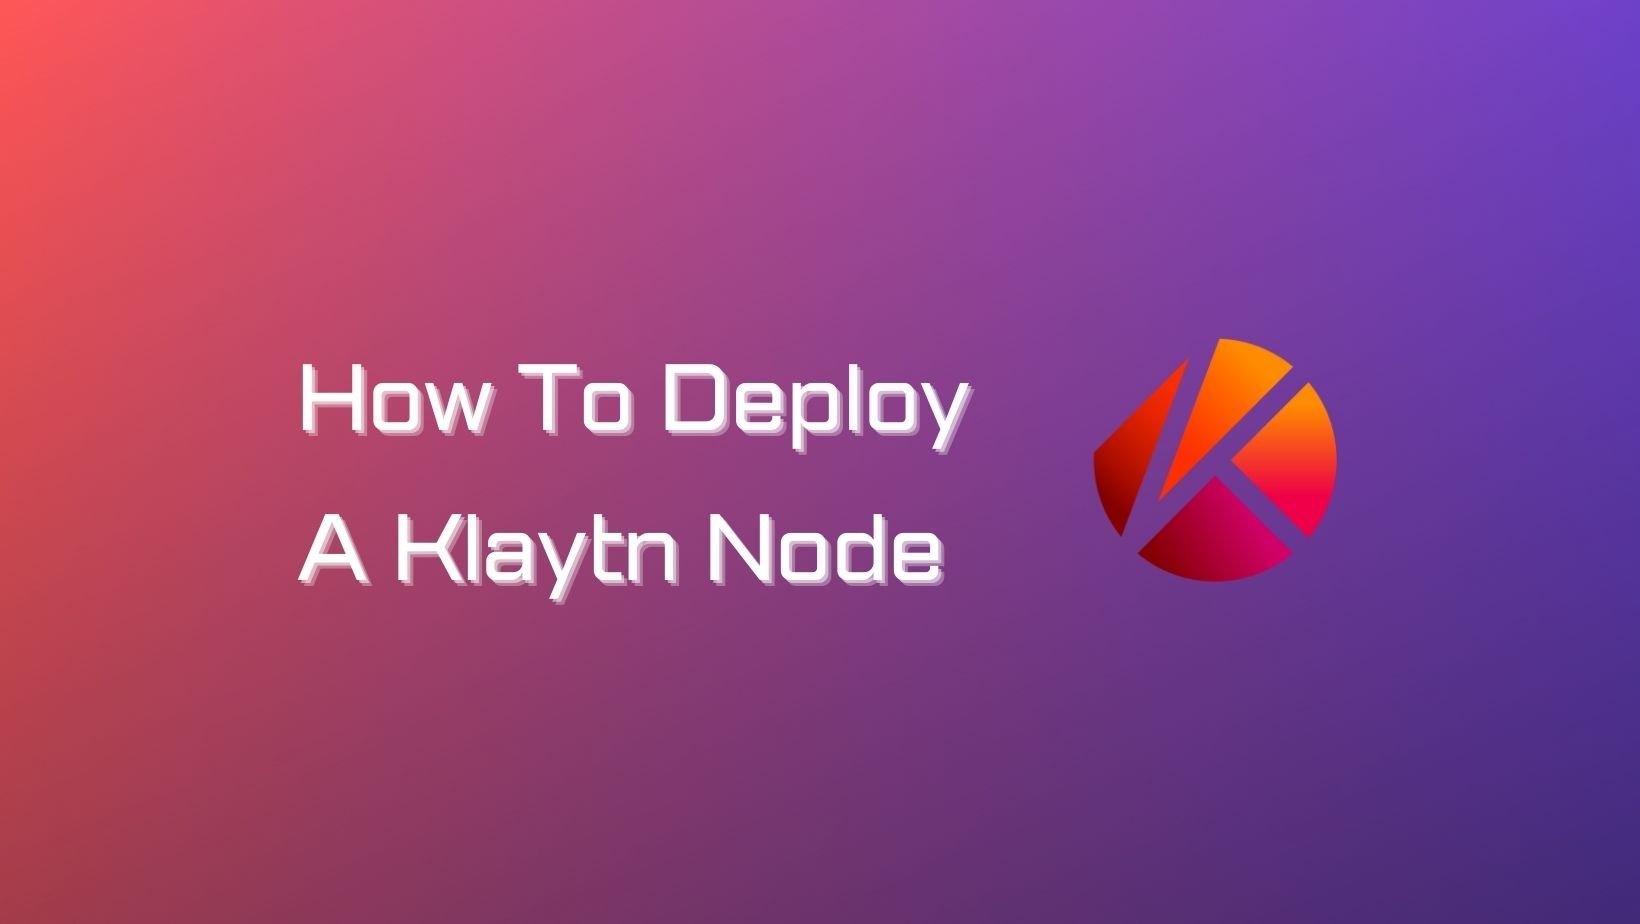 How To Deploy A Klaytn Node on Linux